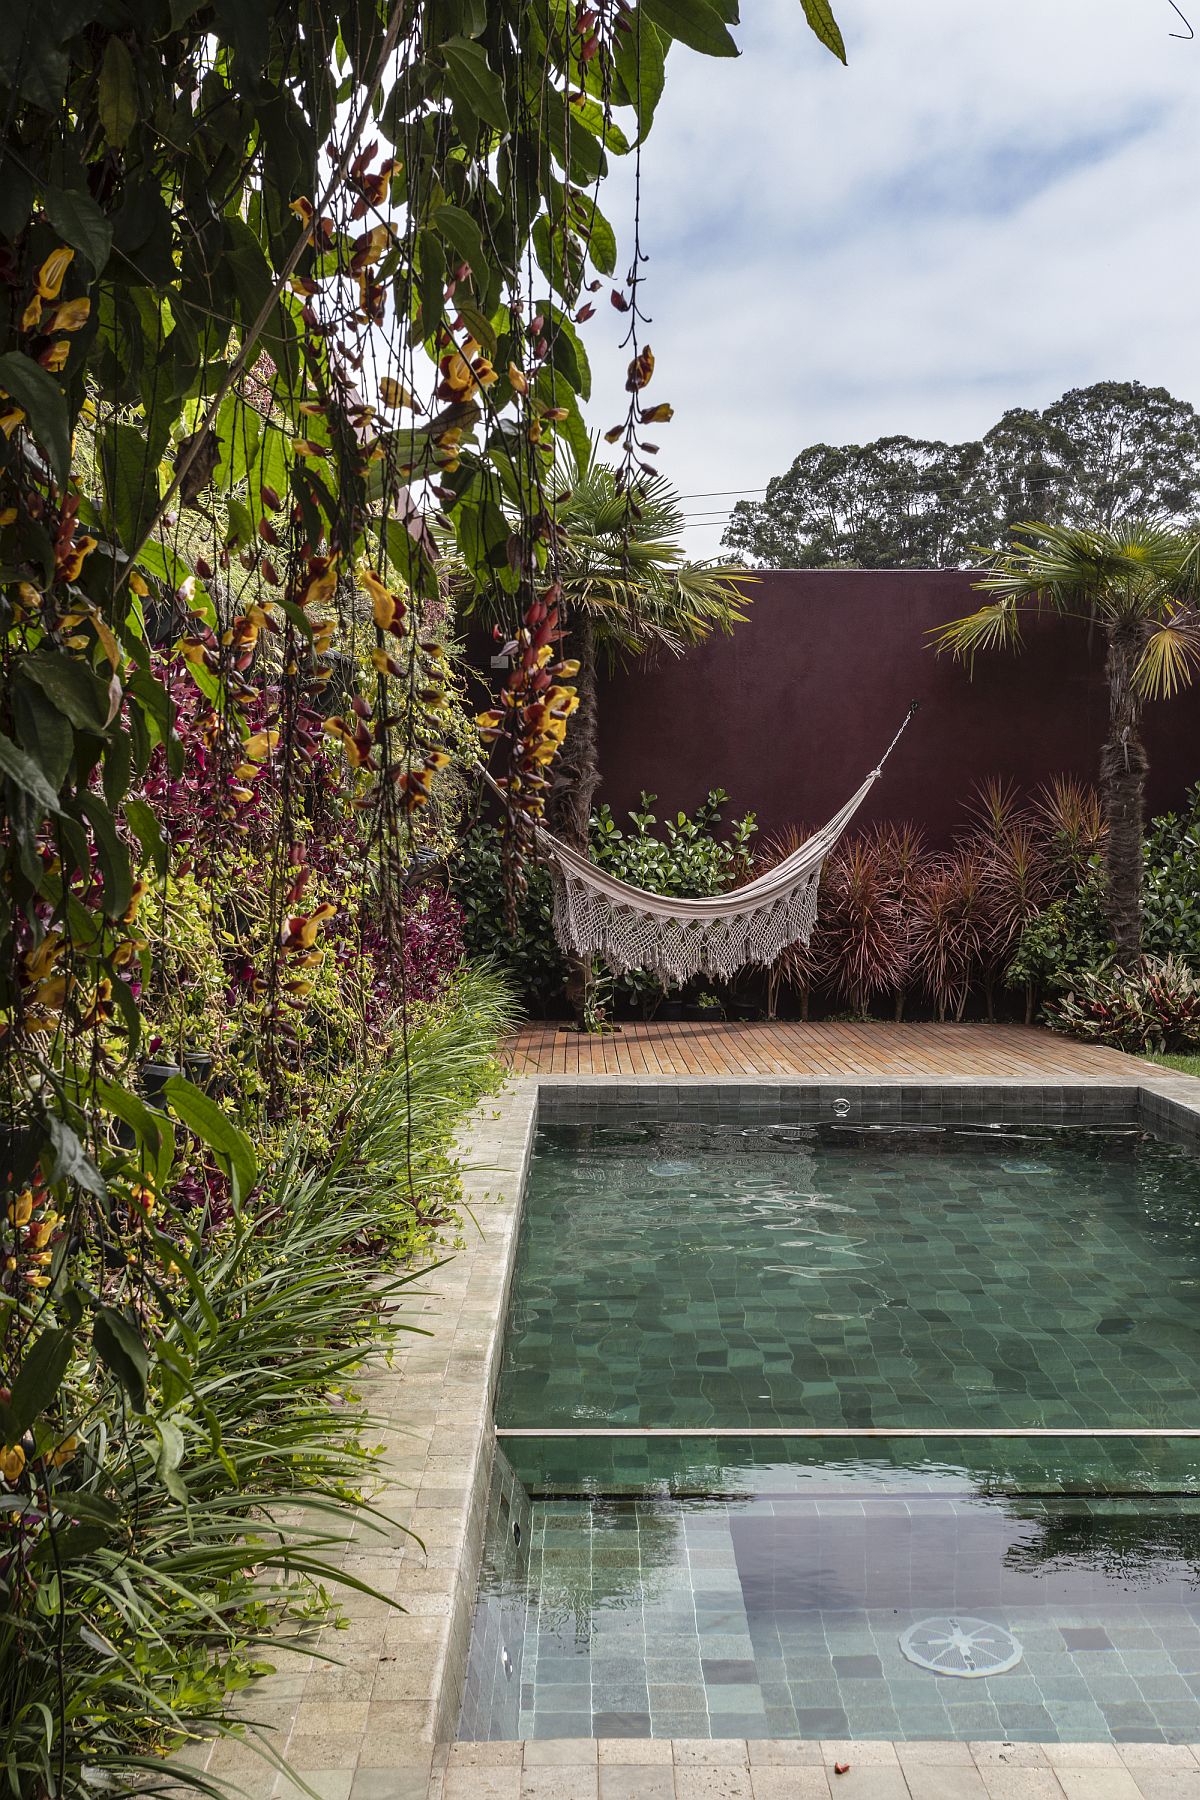 Relaxing-hammock-in-the-corner-next-to-the-pool-offers-a-serene-and-private-refuge-65780